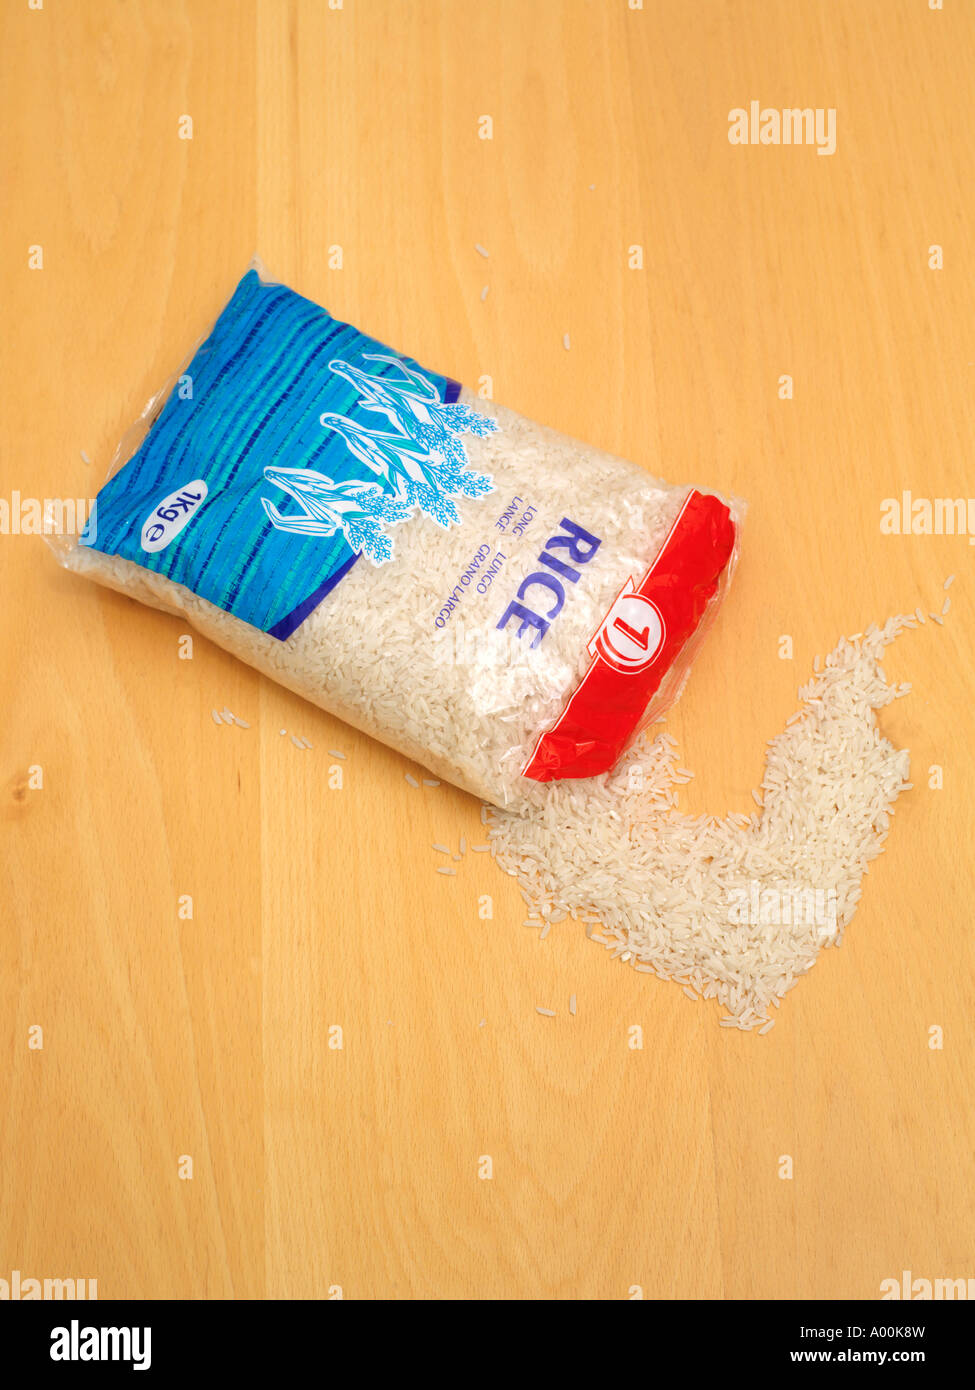 Bag of Long Grain Rice with Some Spilling Out Stock Photo